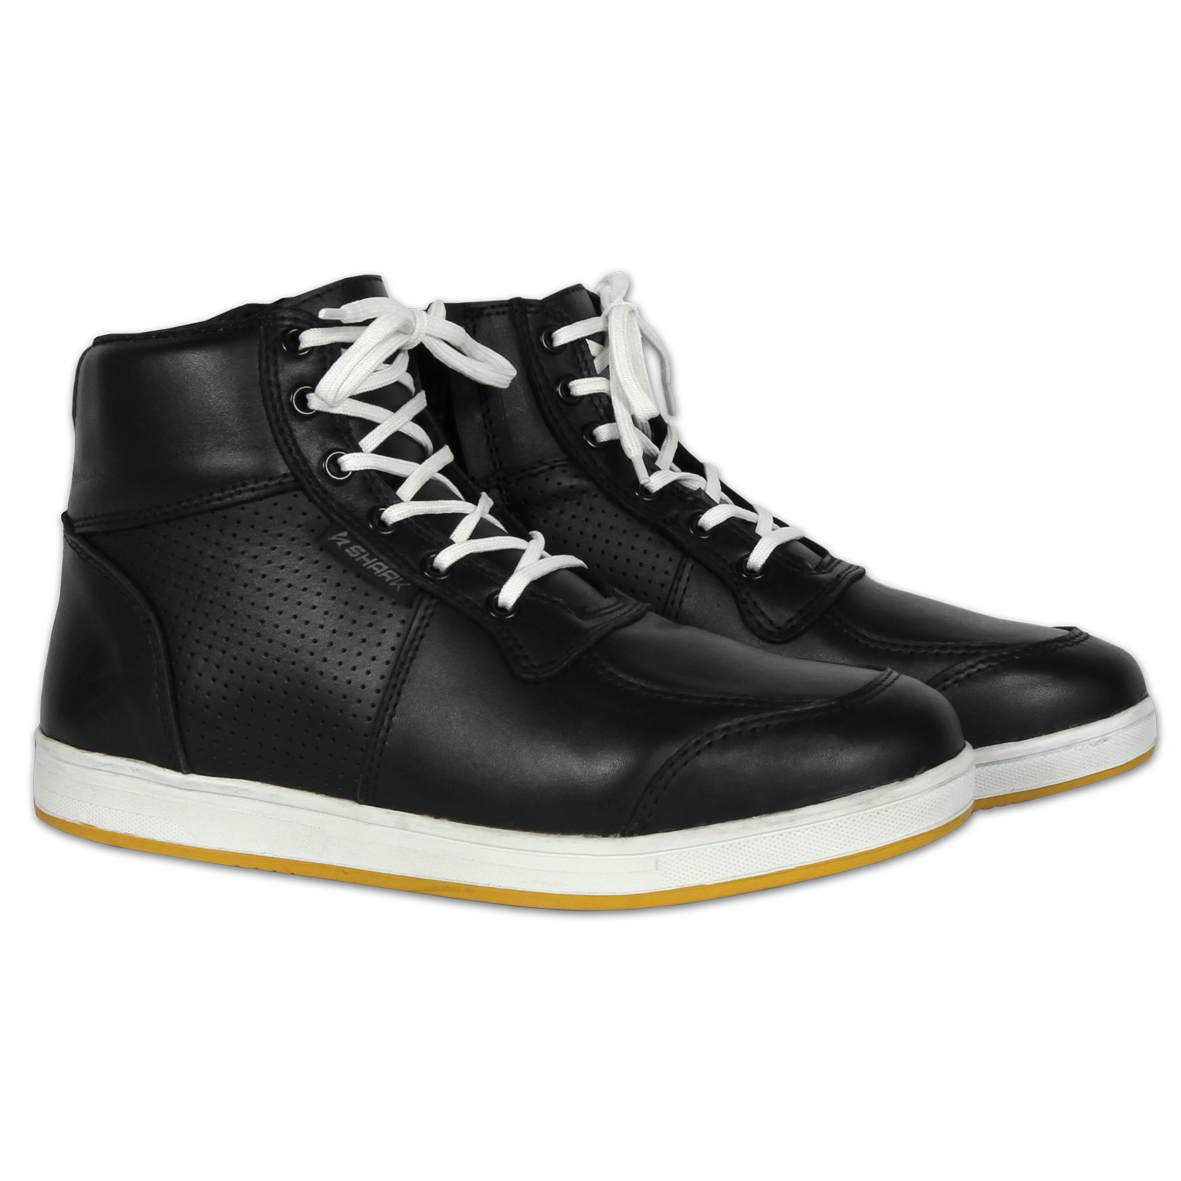 Shark Leather Classic Sneakers - Shark Leathers